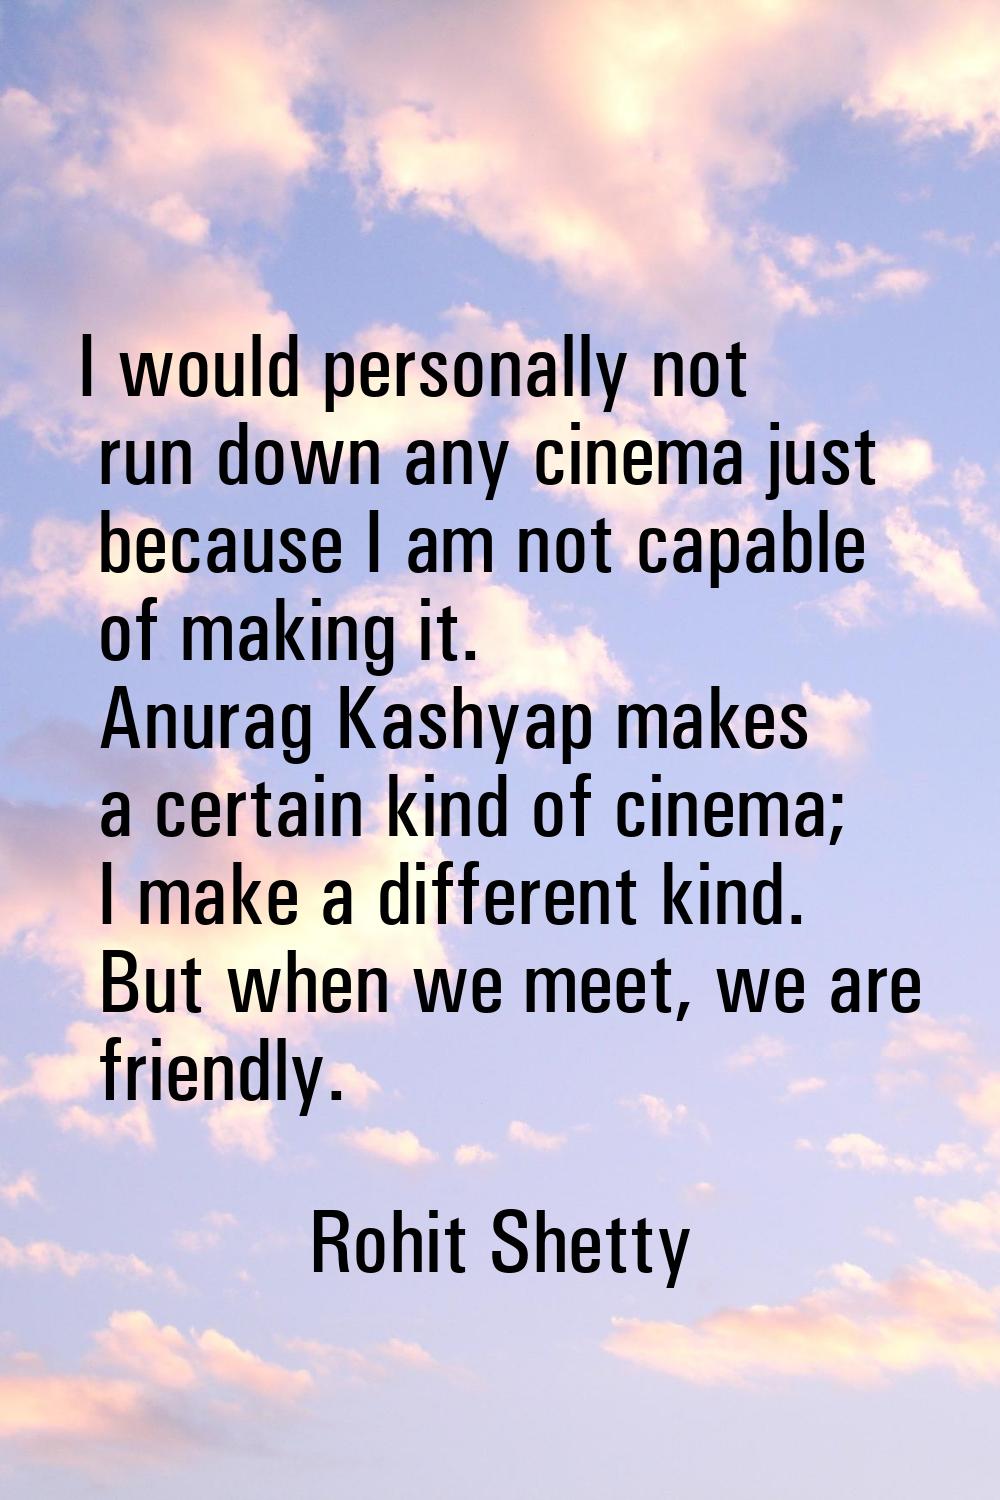 I would personally not run down any cinema just because I am not capable of making it. Anurag Kashy